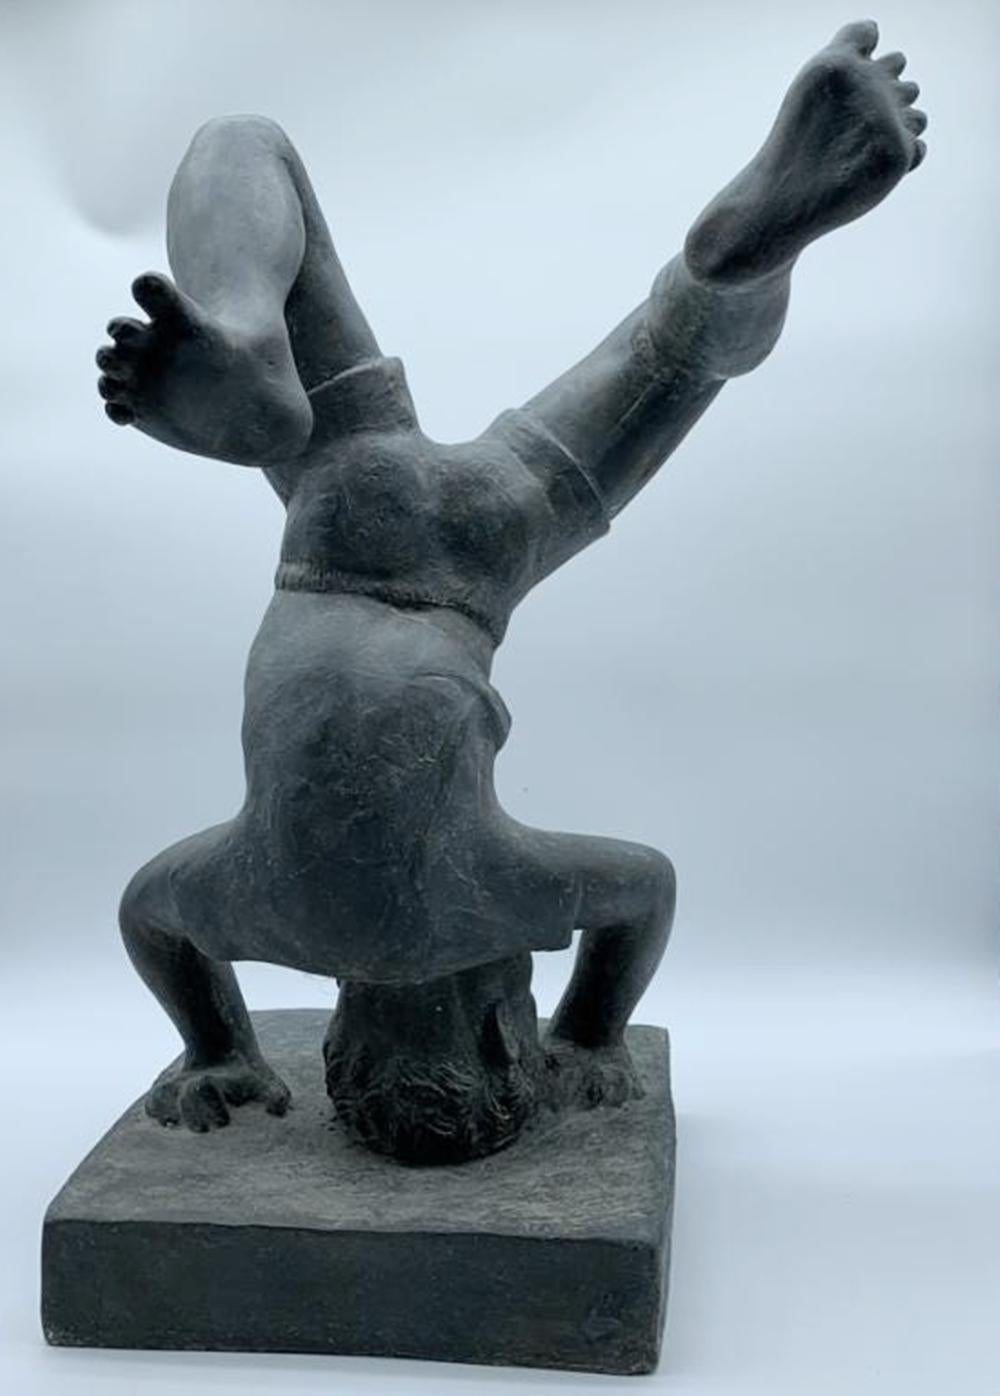 Introducing our stunning Vintage Sculpture of a boy doing a Handstand, straight from the USA in the swinging 1960s. This captivating piece of art will undoubtedly add a touch of charm and nostalgia to your space, making it the perfect addition to